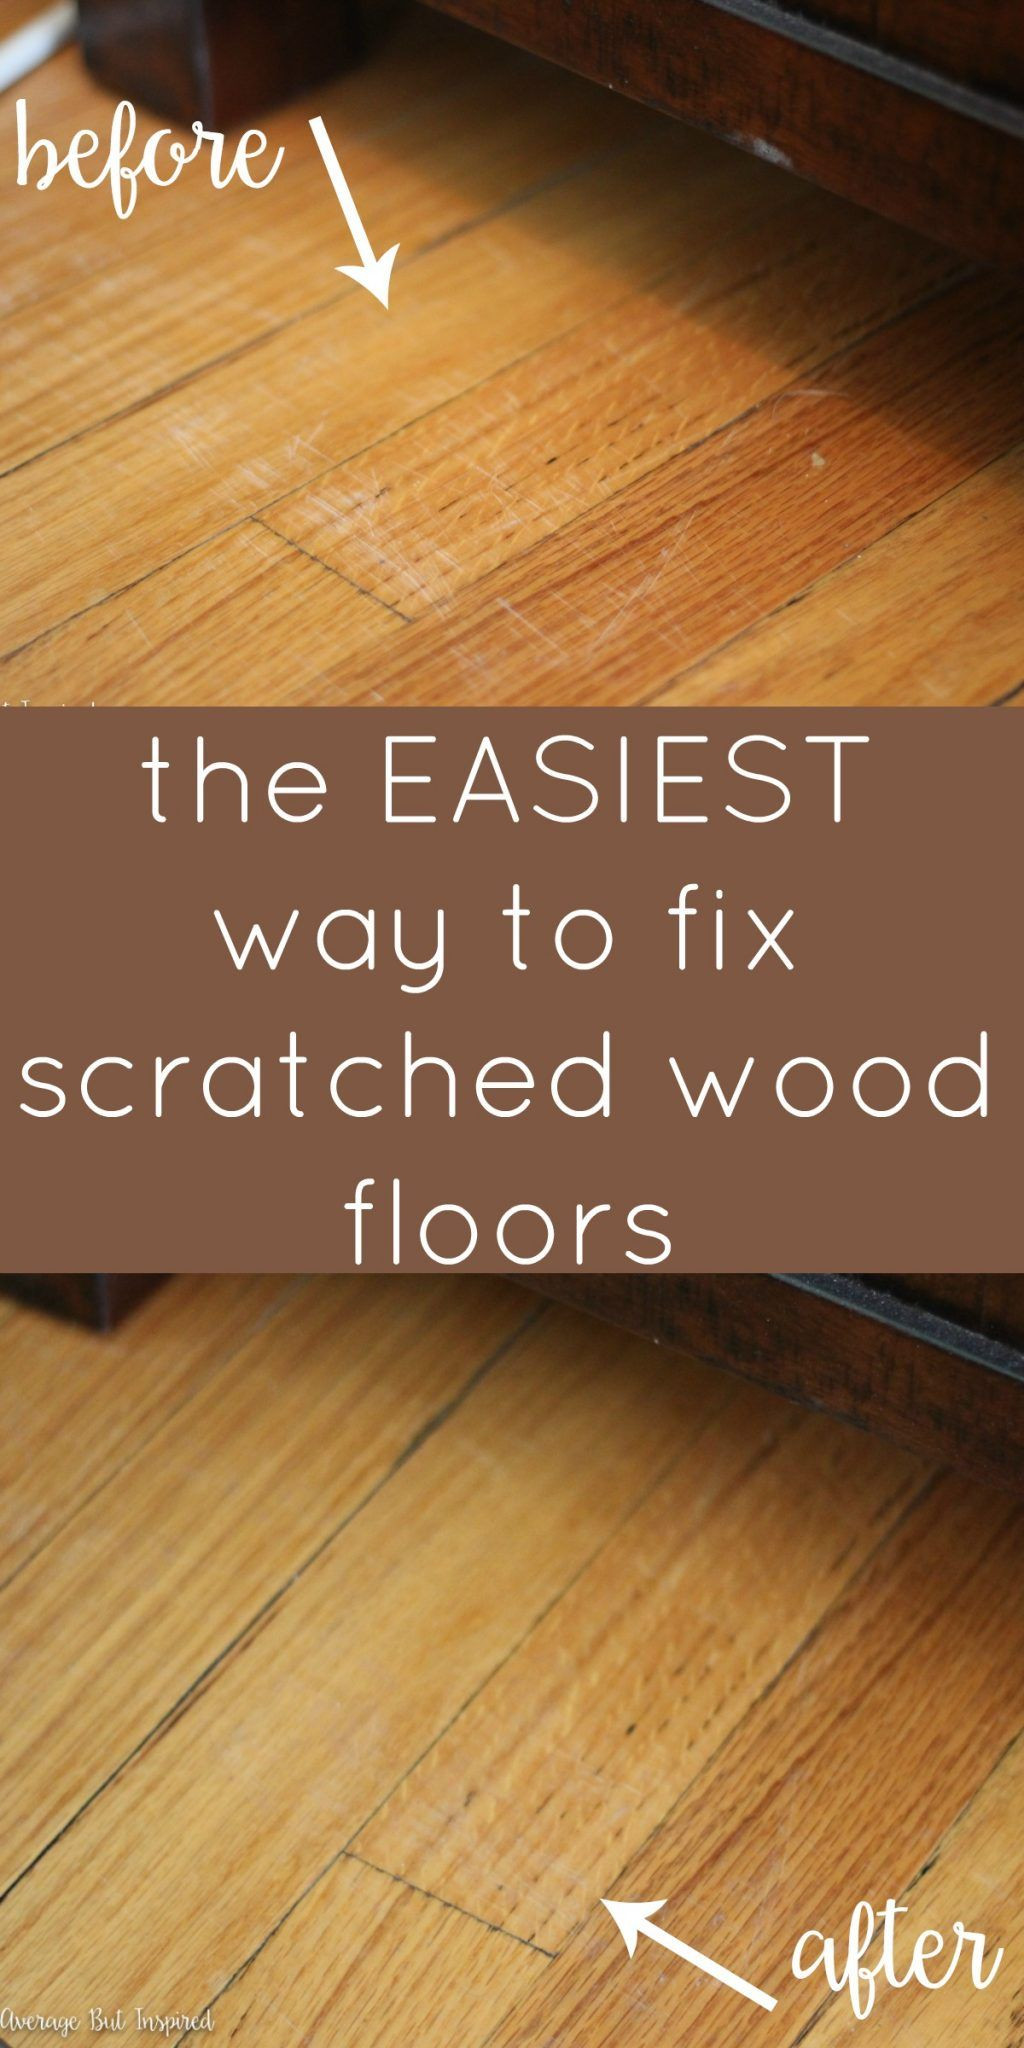 29 Fabulous Average Cost to Refinish Hardwood Floors Yourself 2024 free download average cost to refinish hardwood floors yourself of laminate wood flooring click pic for lots of wood floor ideas within laminate wood flooring click pic for lots of wood floor ideas hardwo